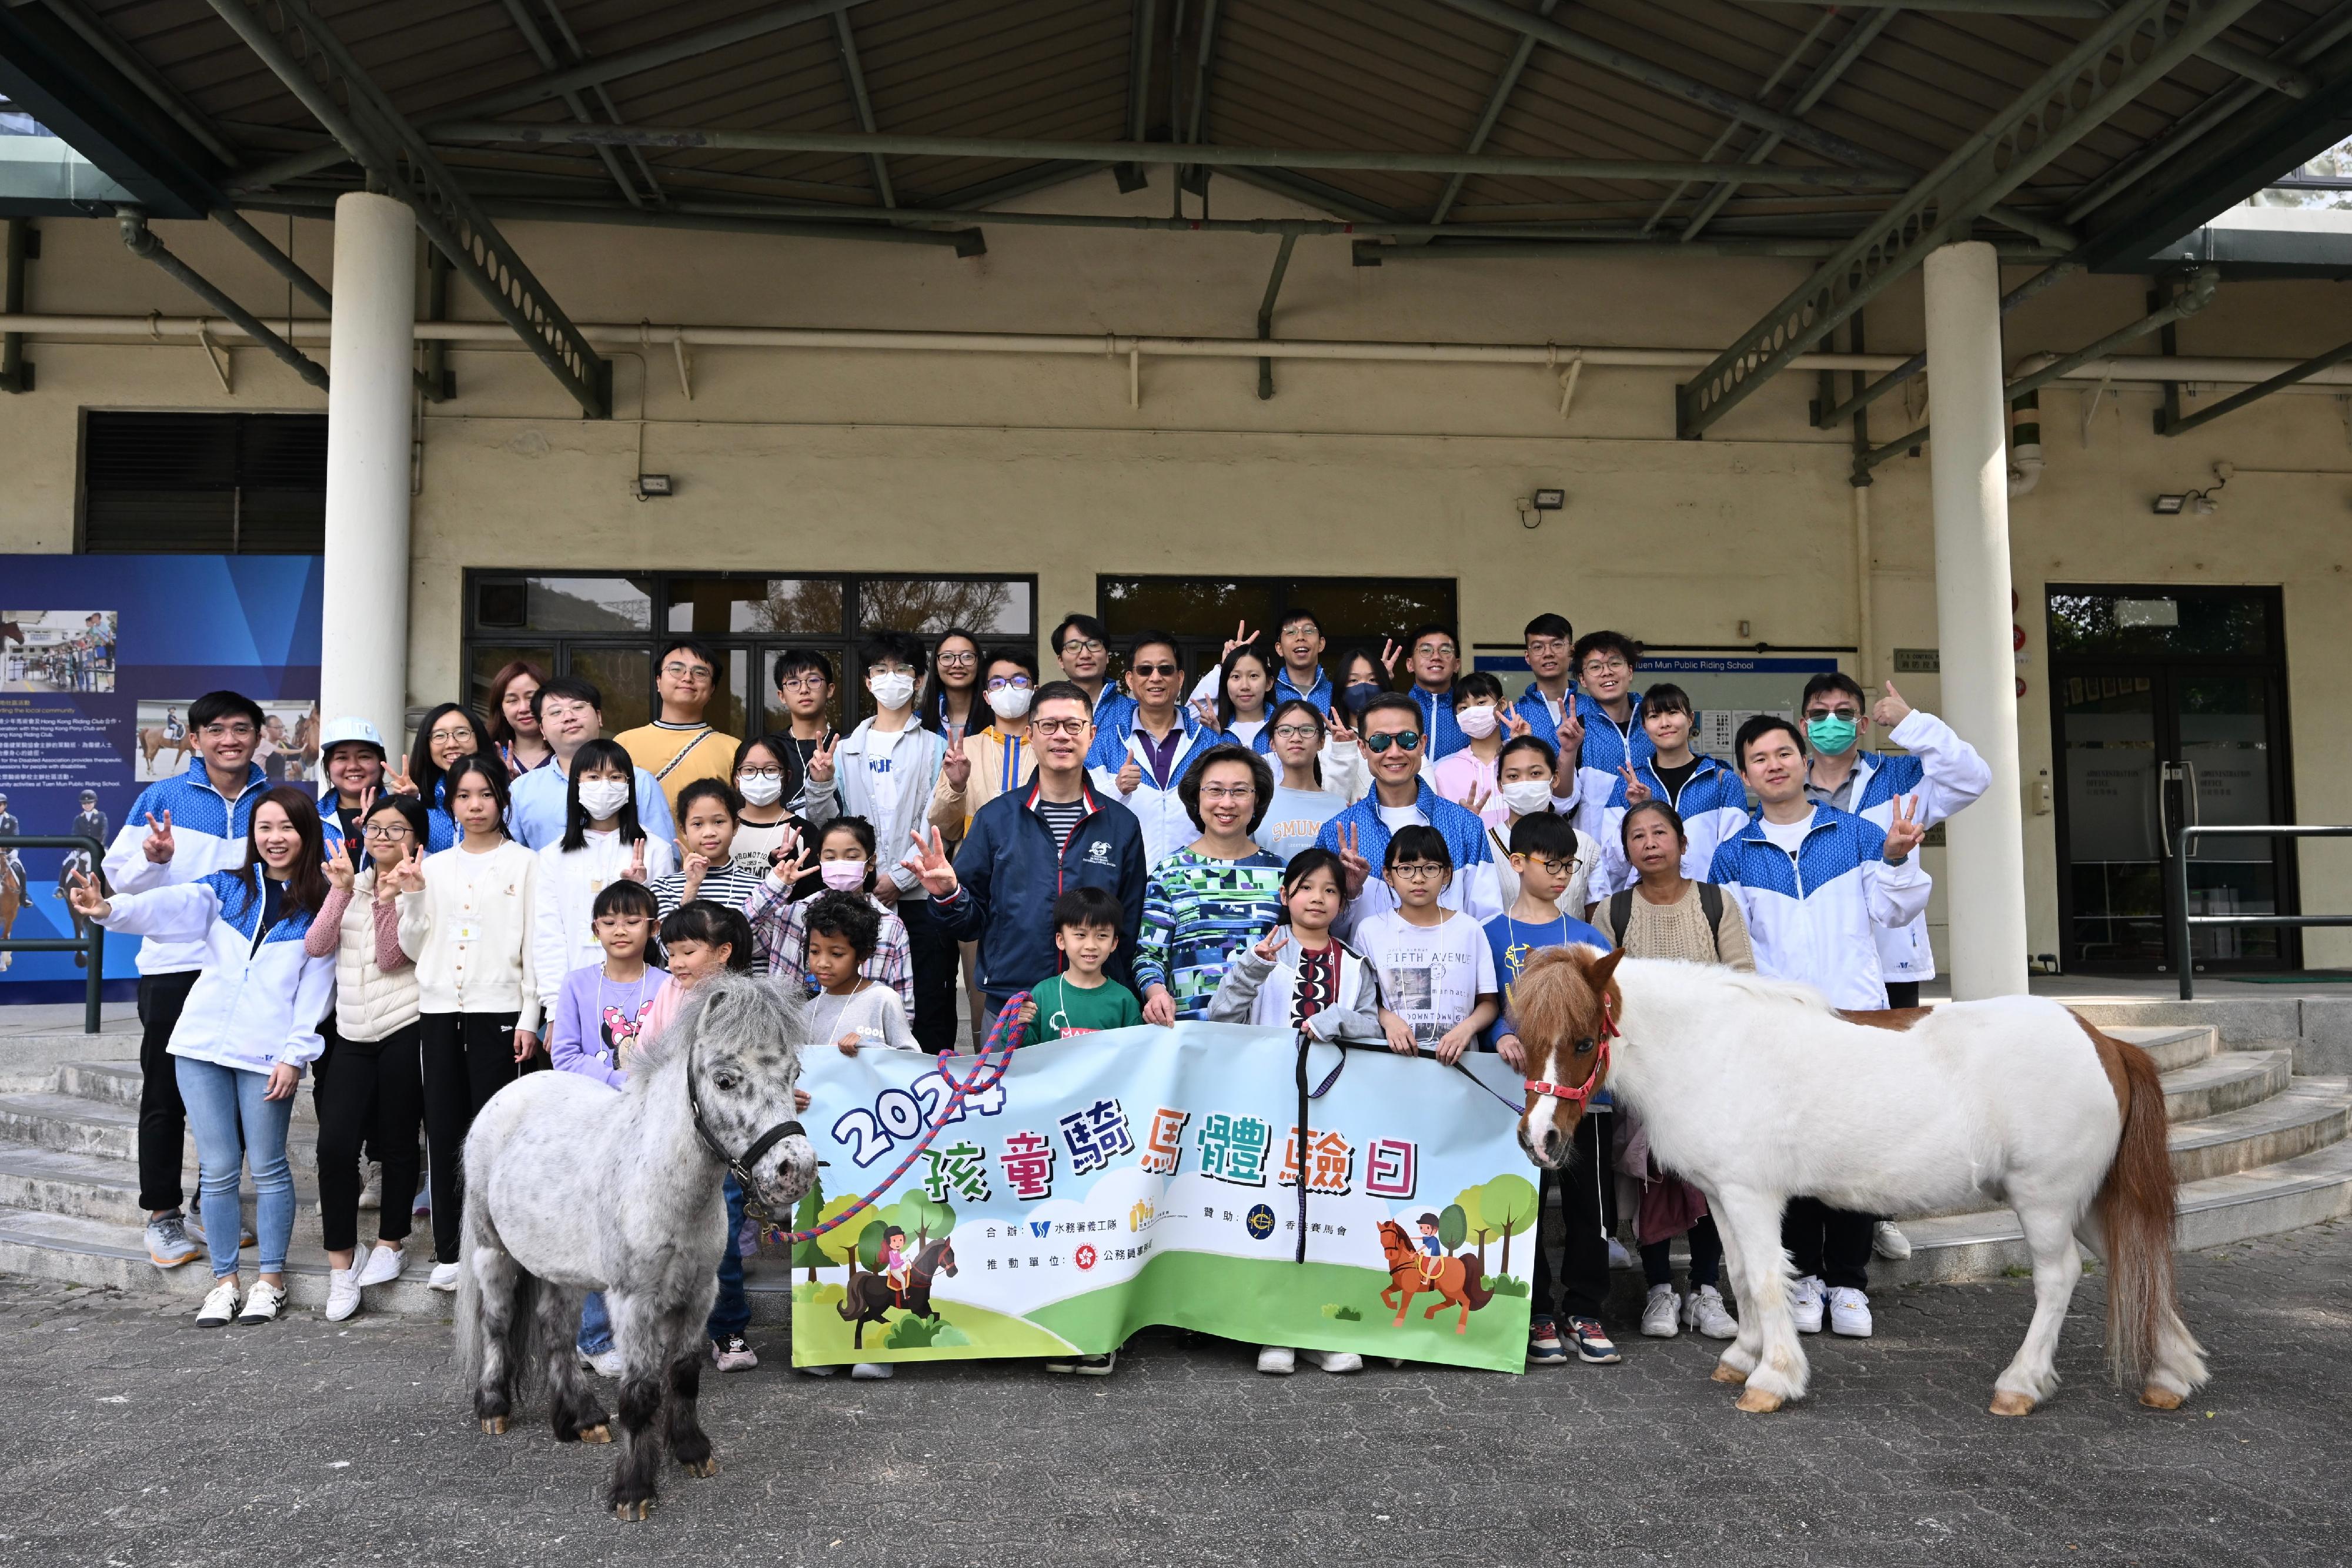 About 20 children from grassroots families today (January 20) visited the Tuen Mun Public Riding School in the company of civil service volunteers to sample the fun of horse riding and learn about the environment of horses at the stables. The Secretary for the Civil Service, Mrs Ingrid Yeung (second row, fifth right); the Director of Water Supplies, Mr Tony Yau (second row, fourth right); the Head of External Affairs of the Hong Kong Jockey Club, Mr Freely Cheng (second row, sixth right), are pictured with the civil service volunteers and the participating children.